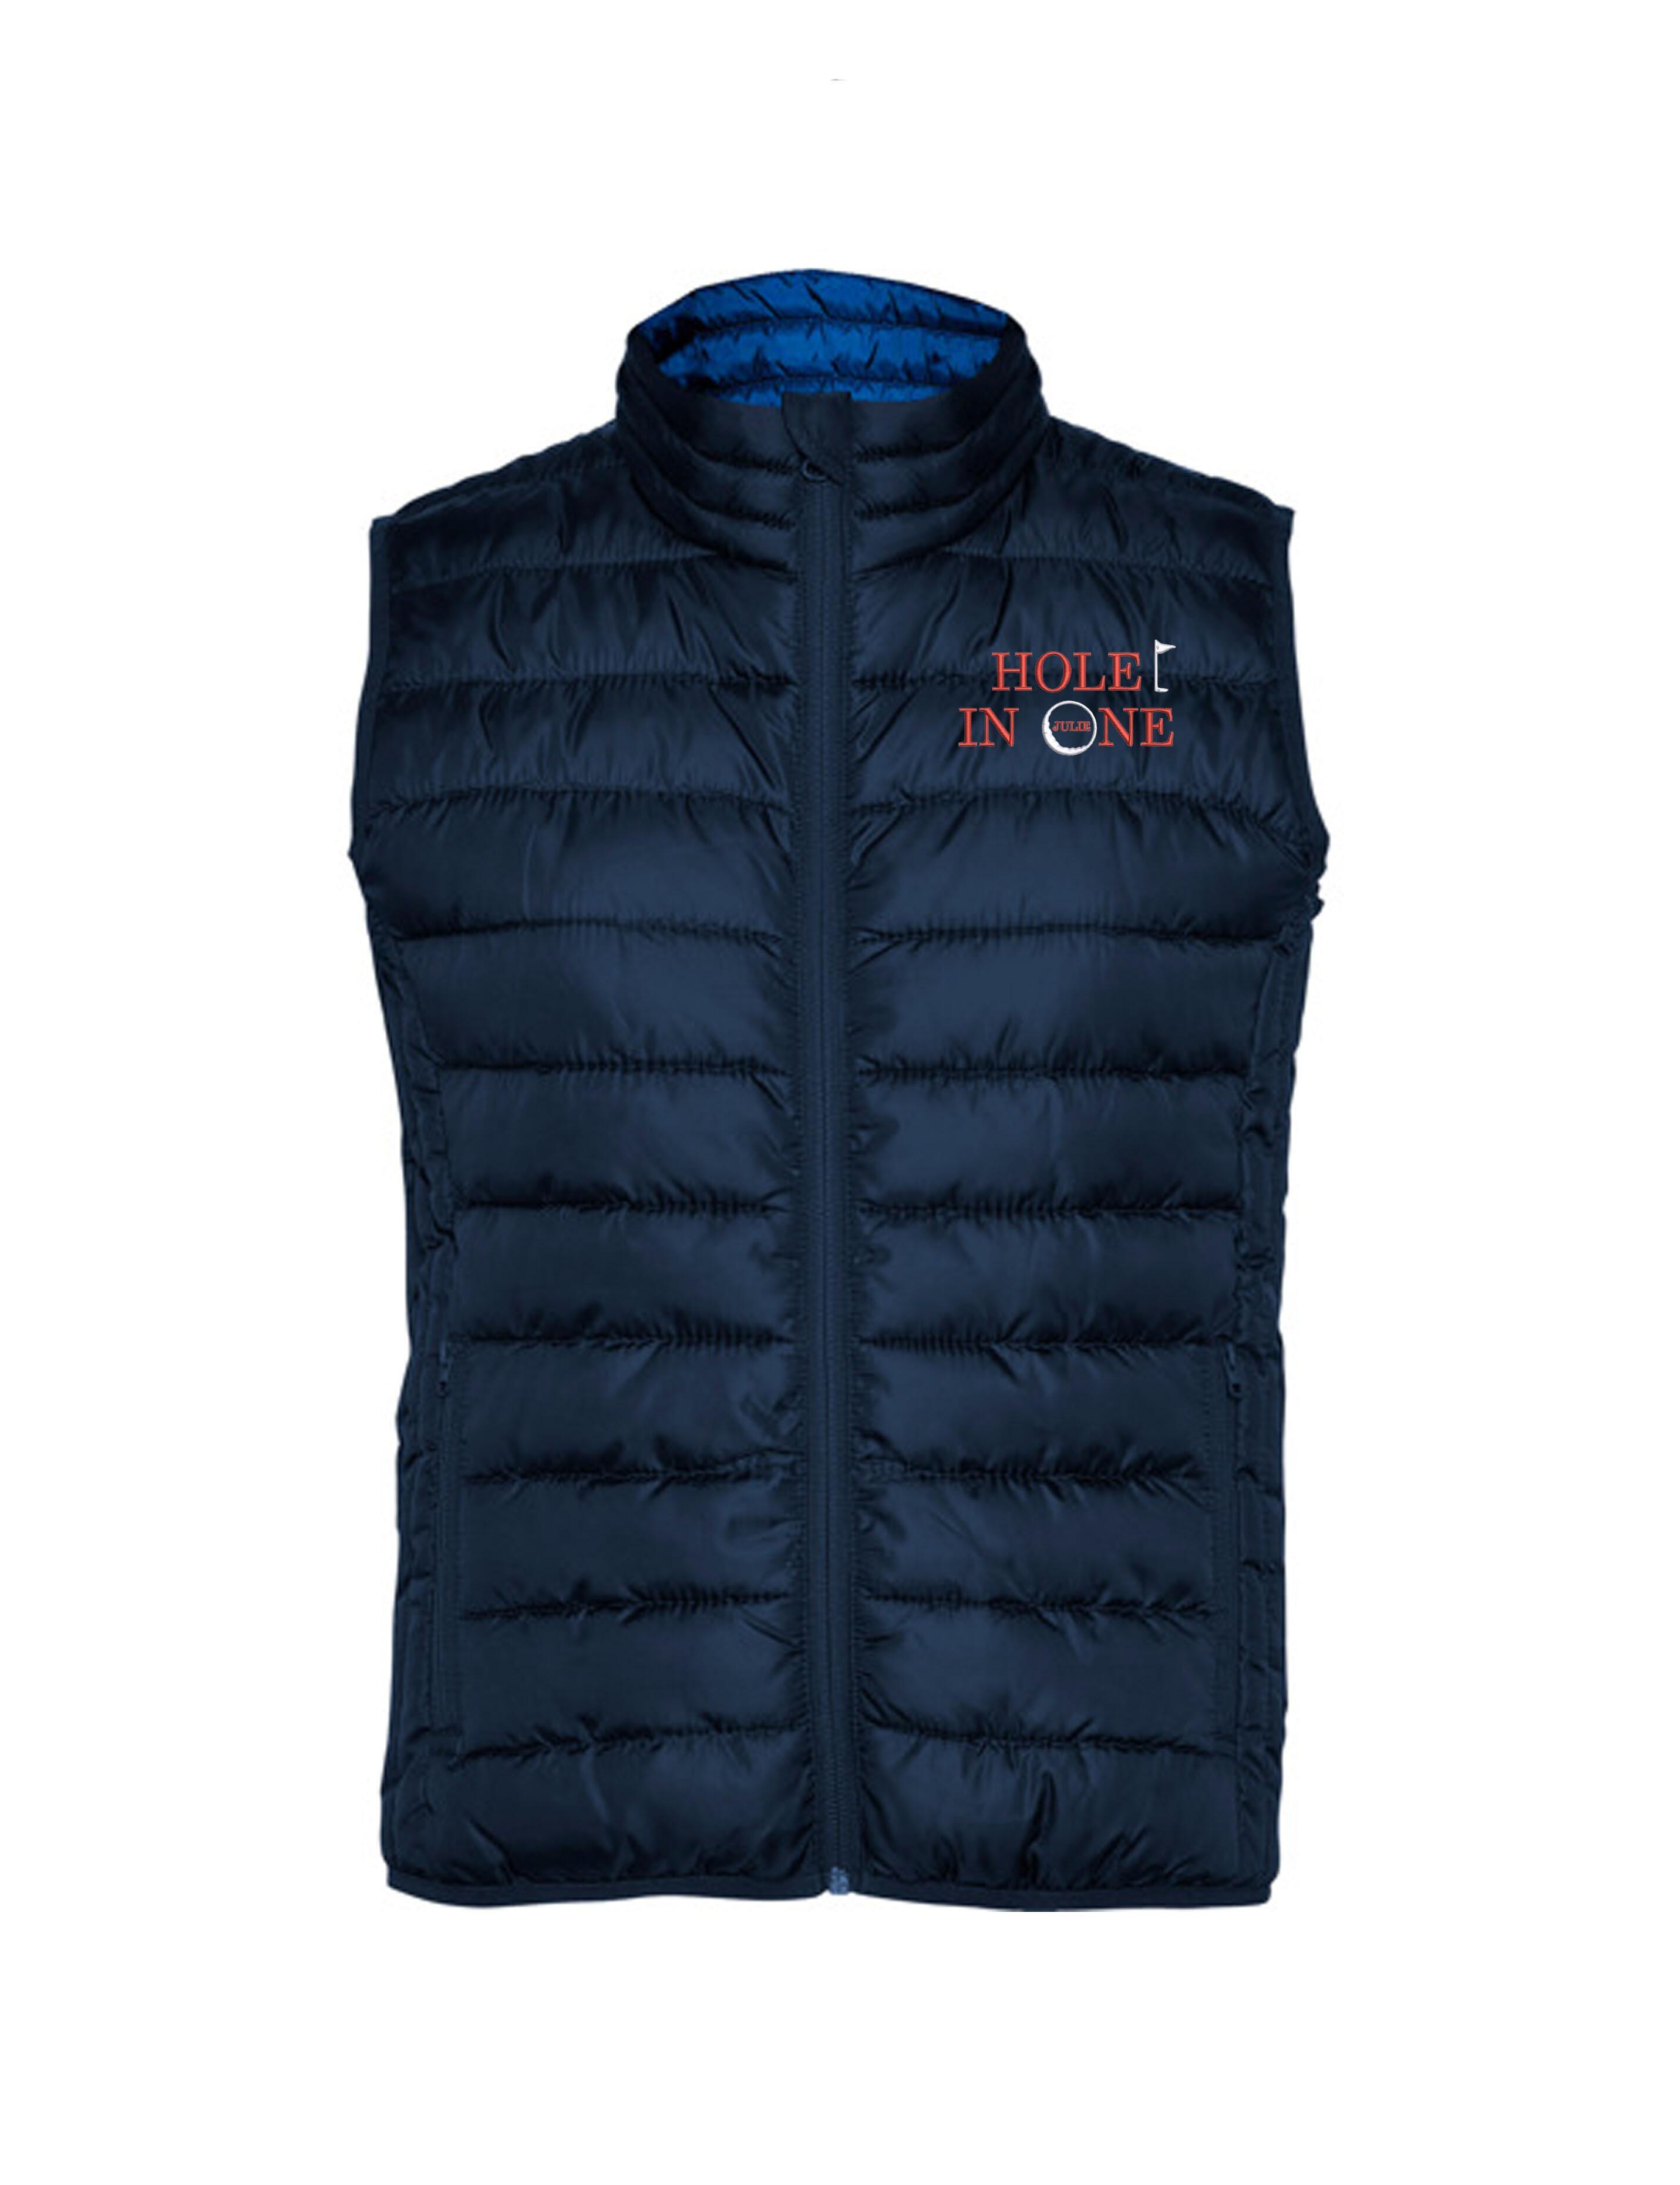 Hole in 1 Design Women's Embroidered Feather Golf Gilet Navy